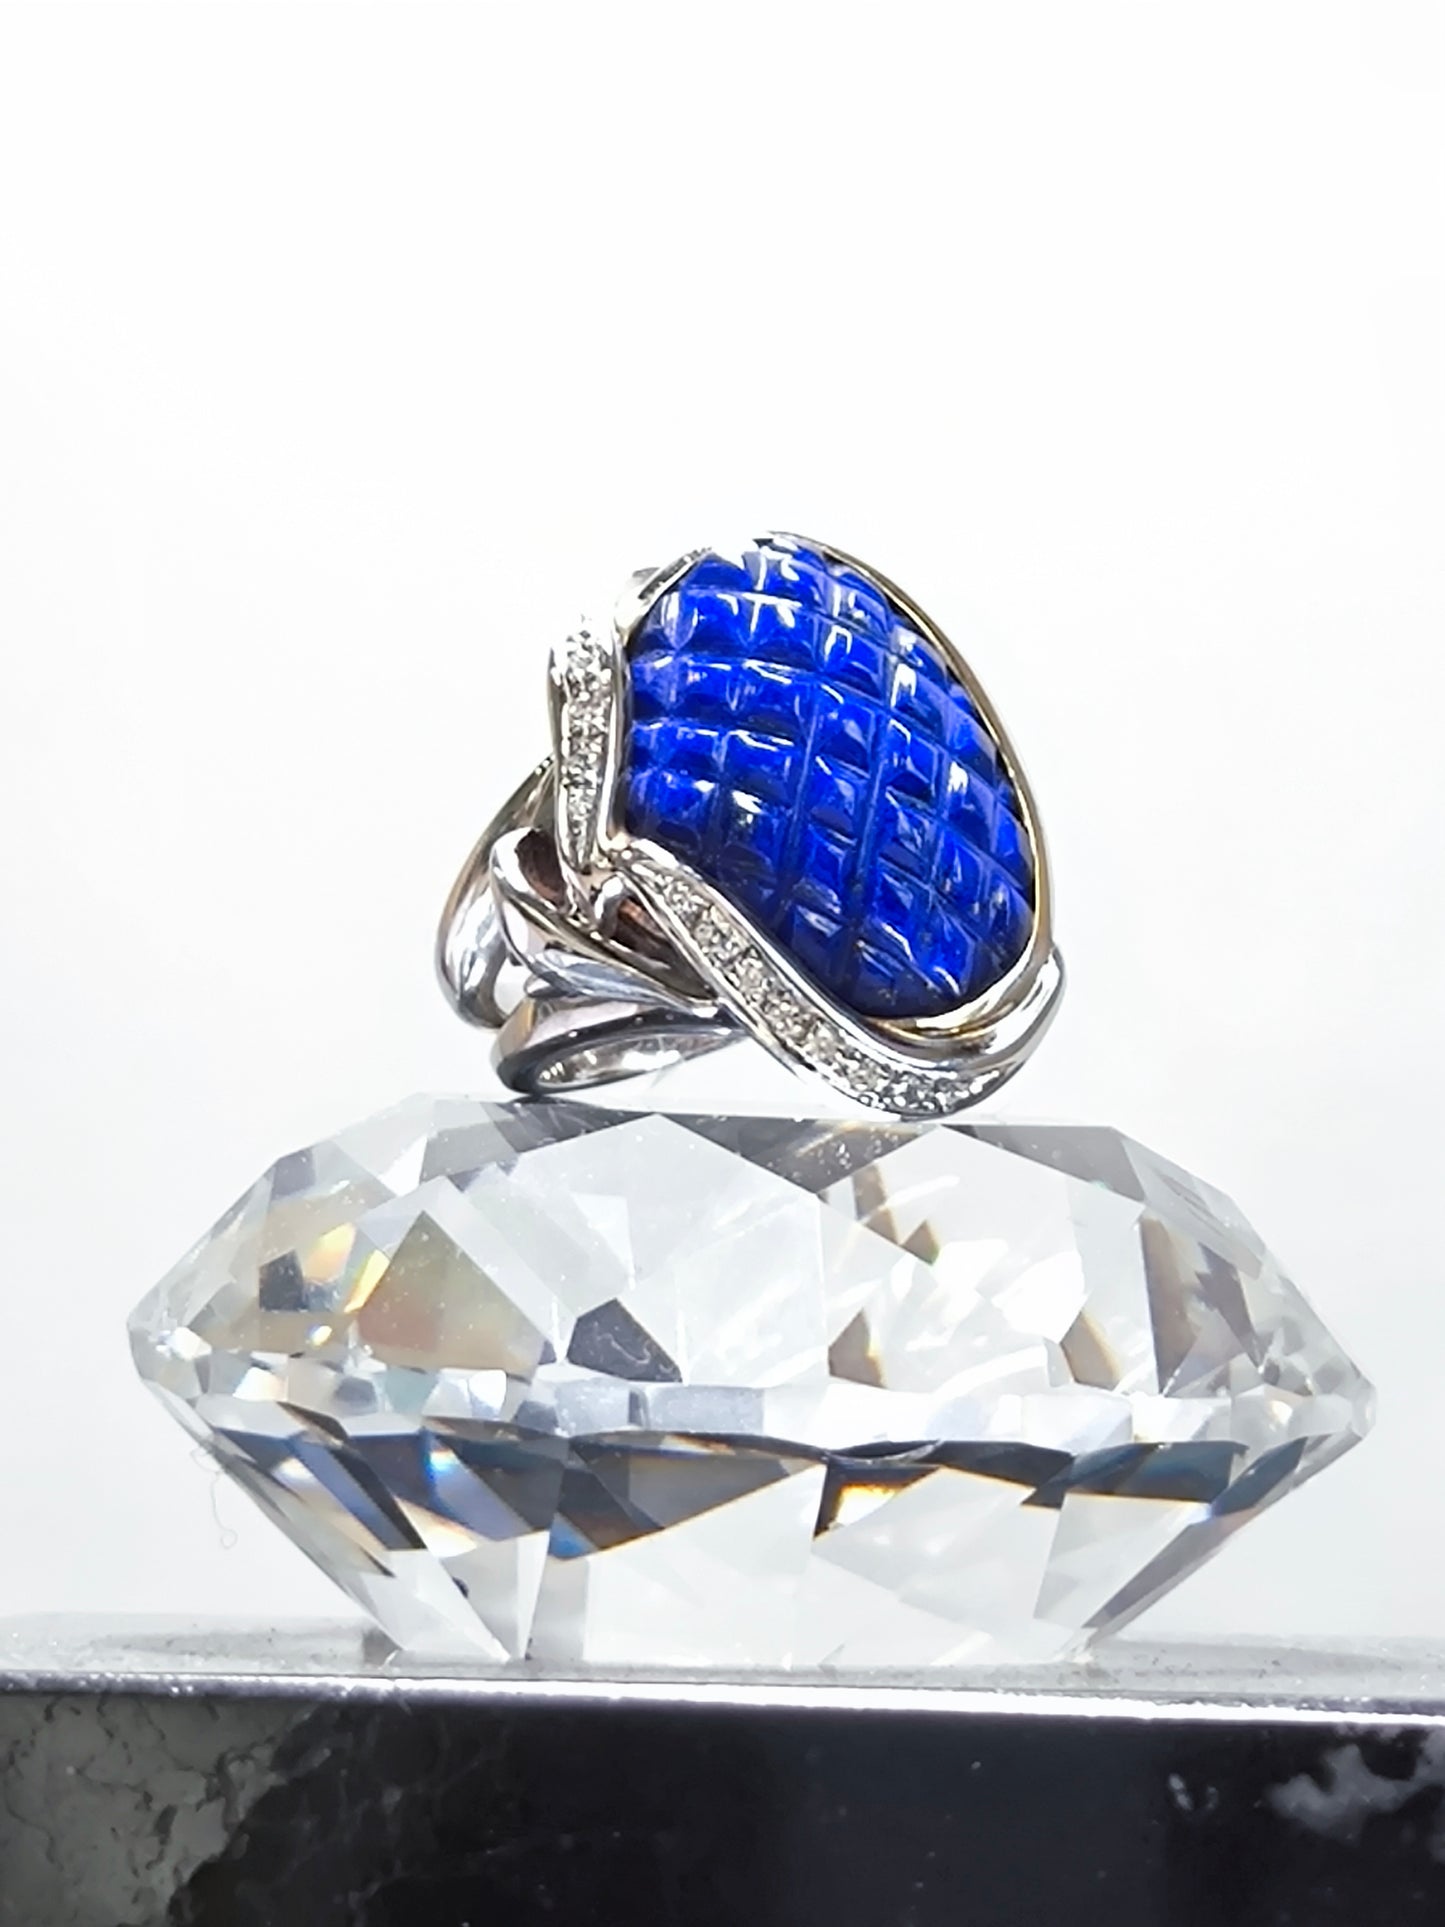 Gold ring with diamonds and lapis lazuli